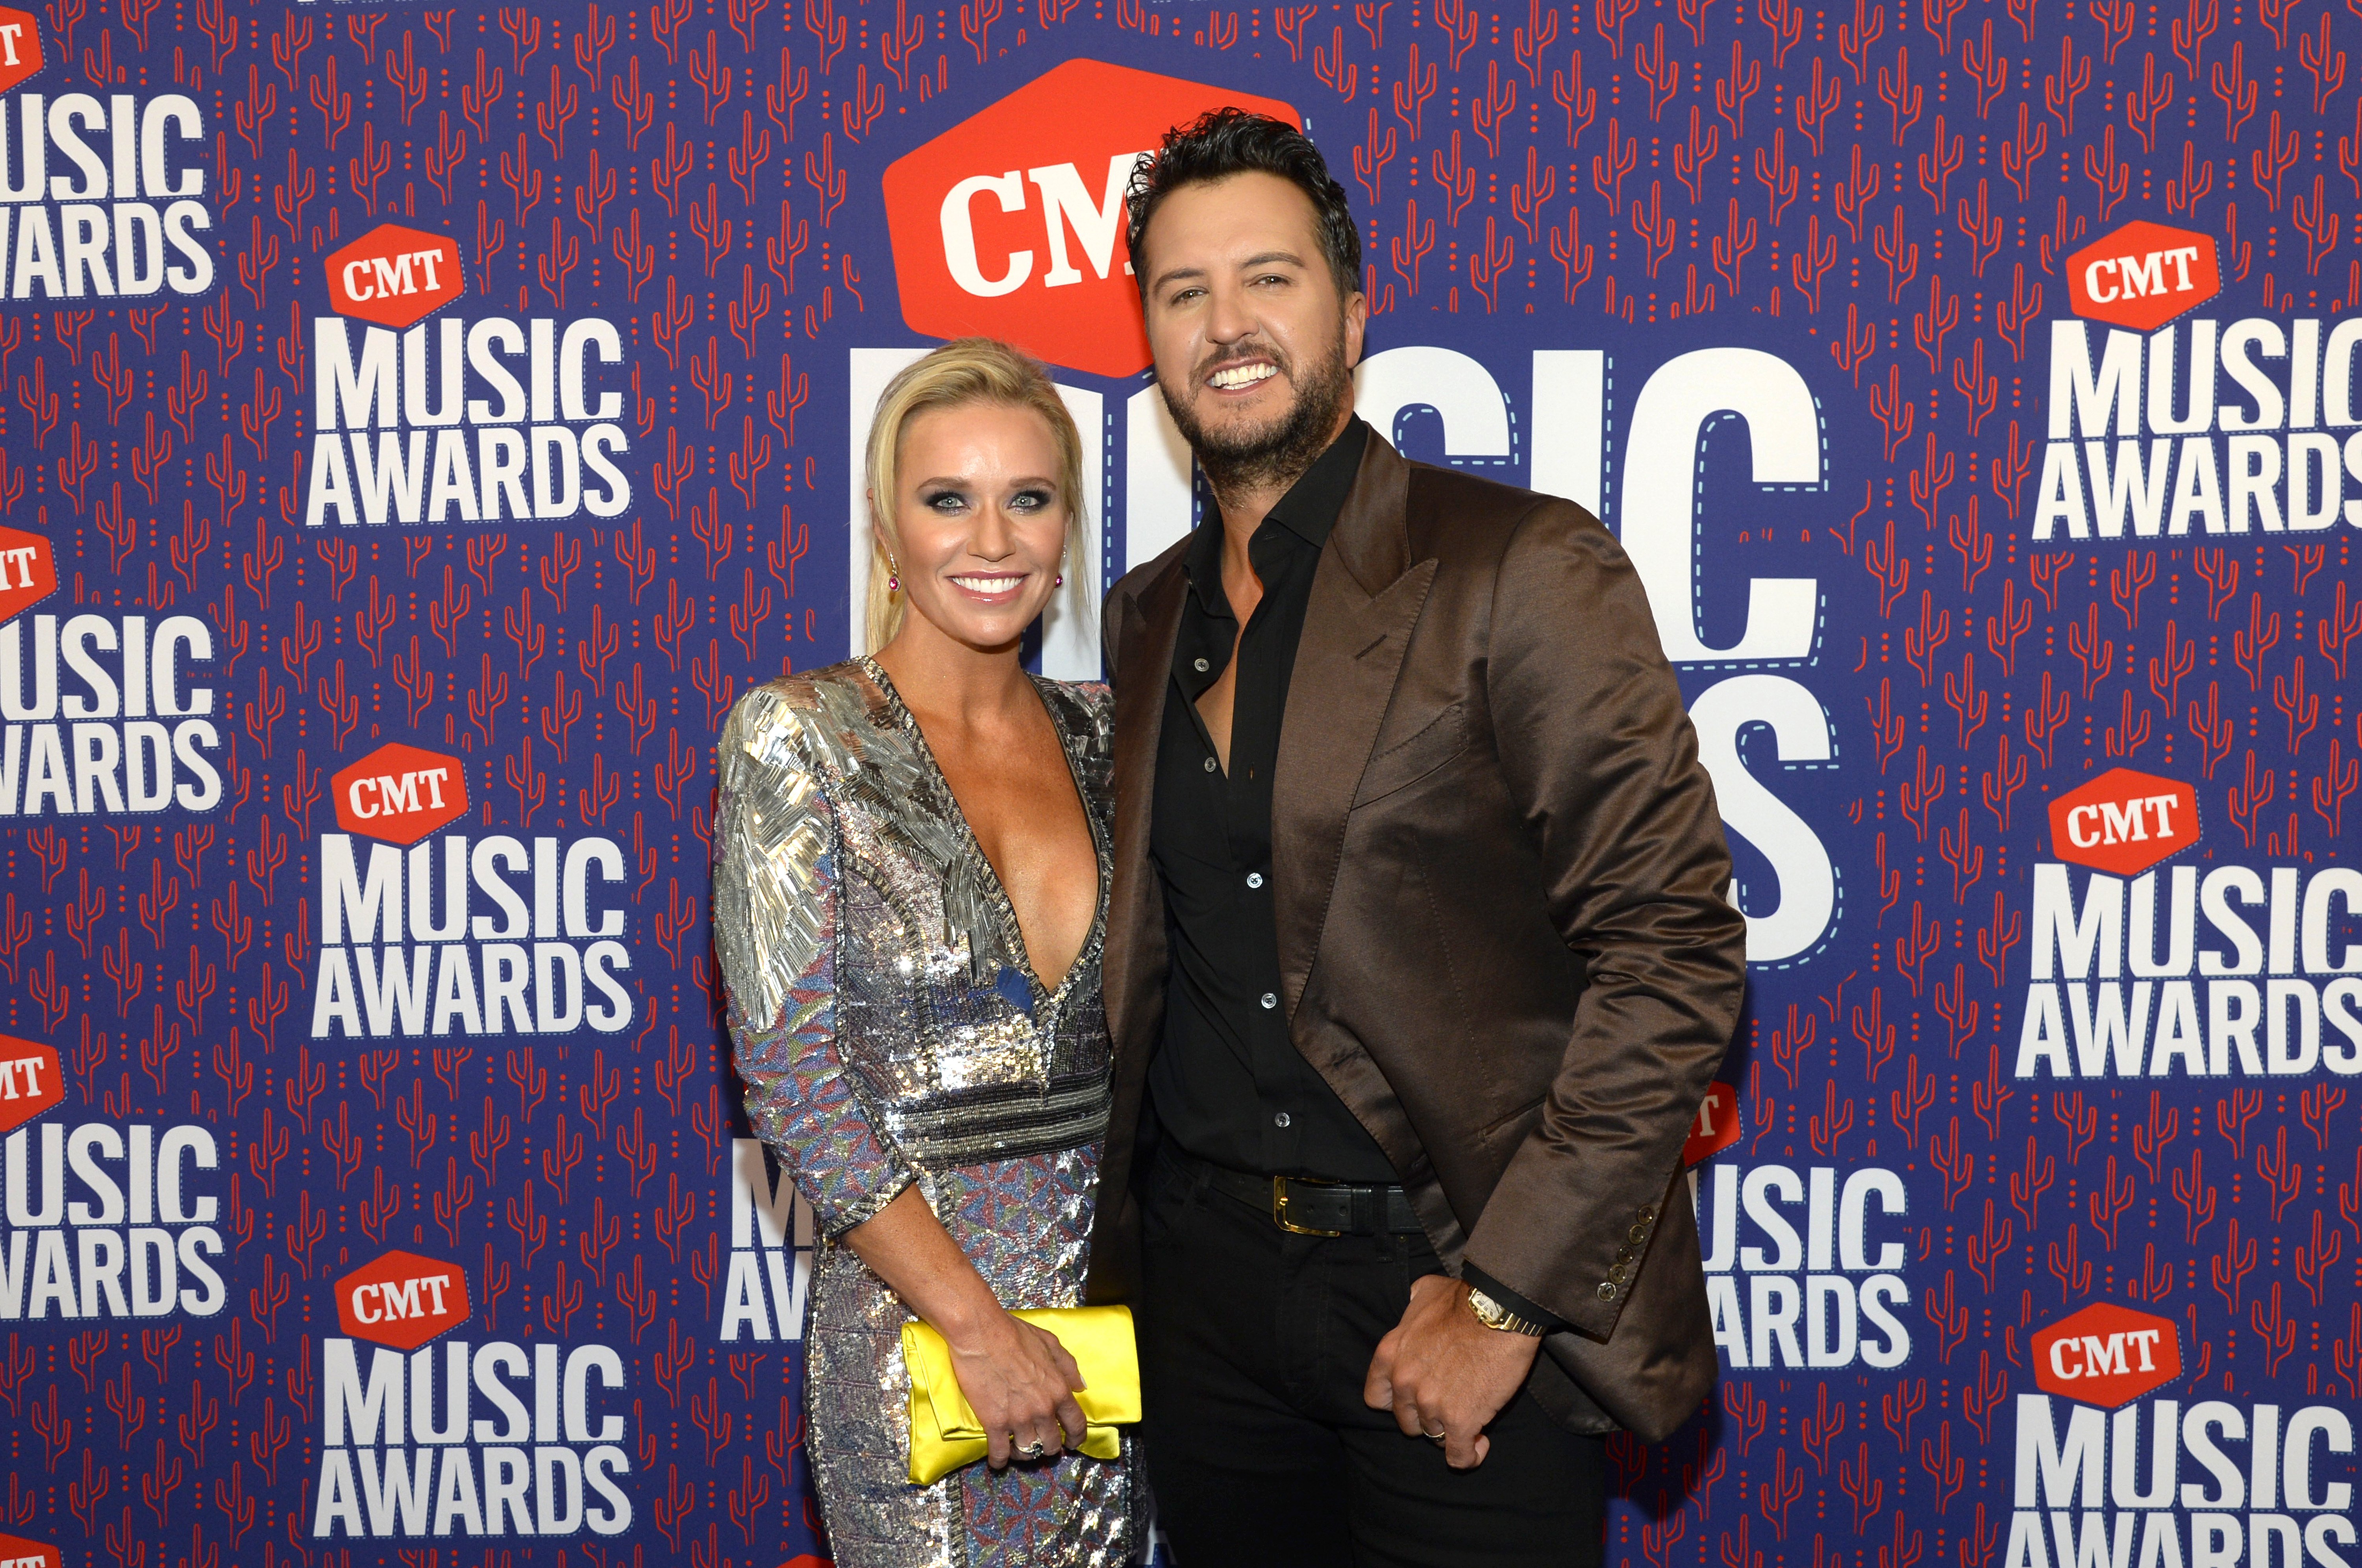 Luke Bryan and his wife, Caroline Boyer pictured at the CMT Music Awards, 2019, Nashville, Tennessee. | Photo: Getty Images